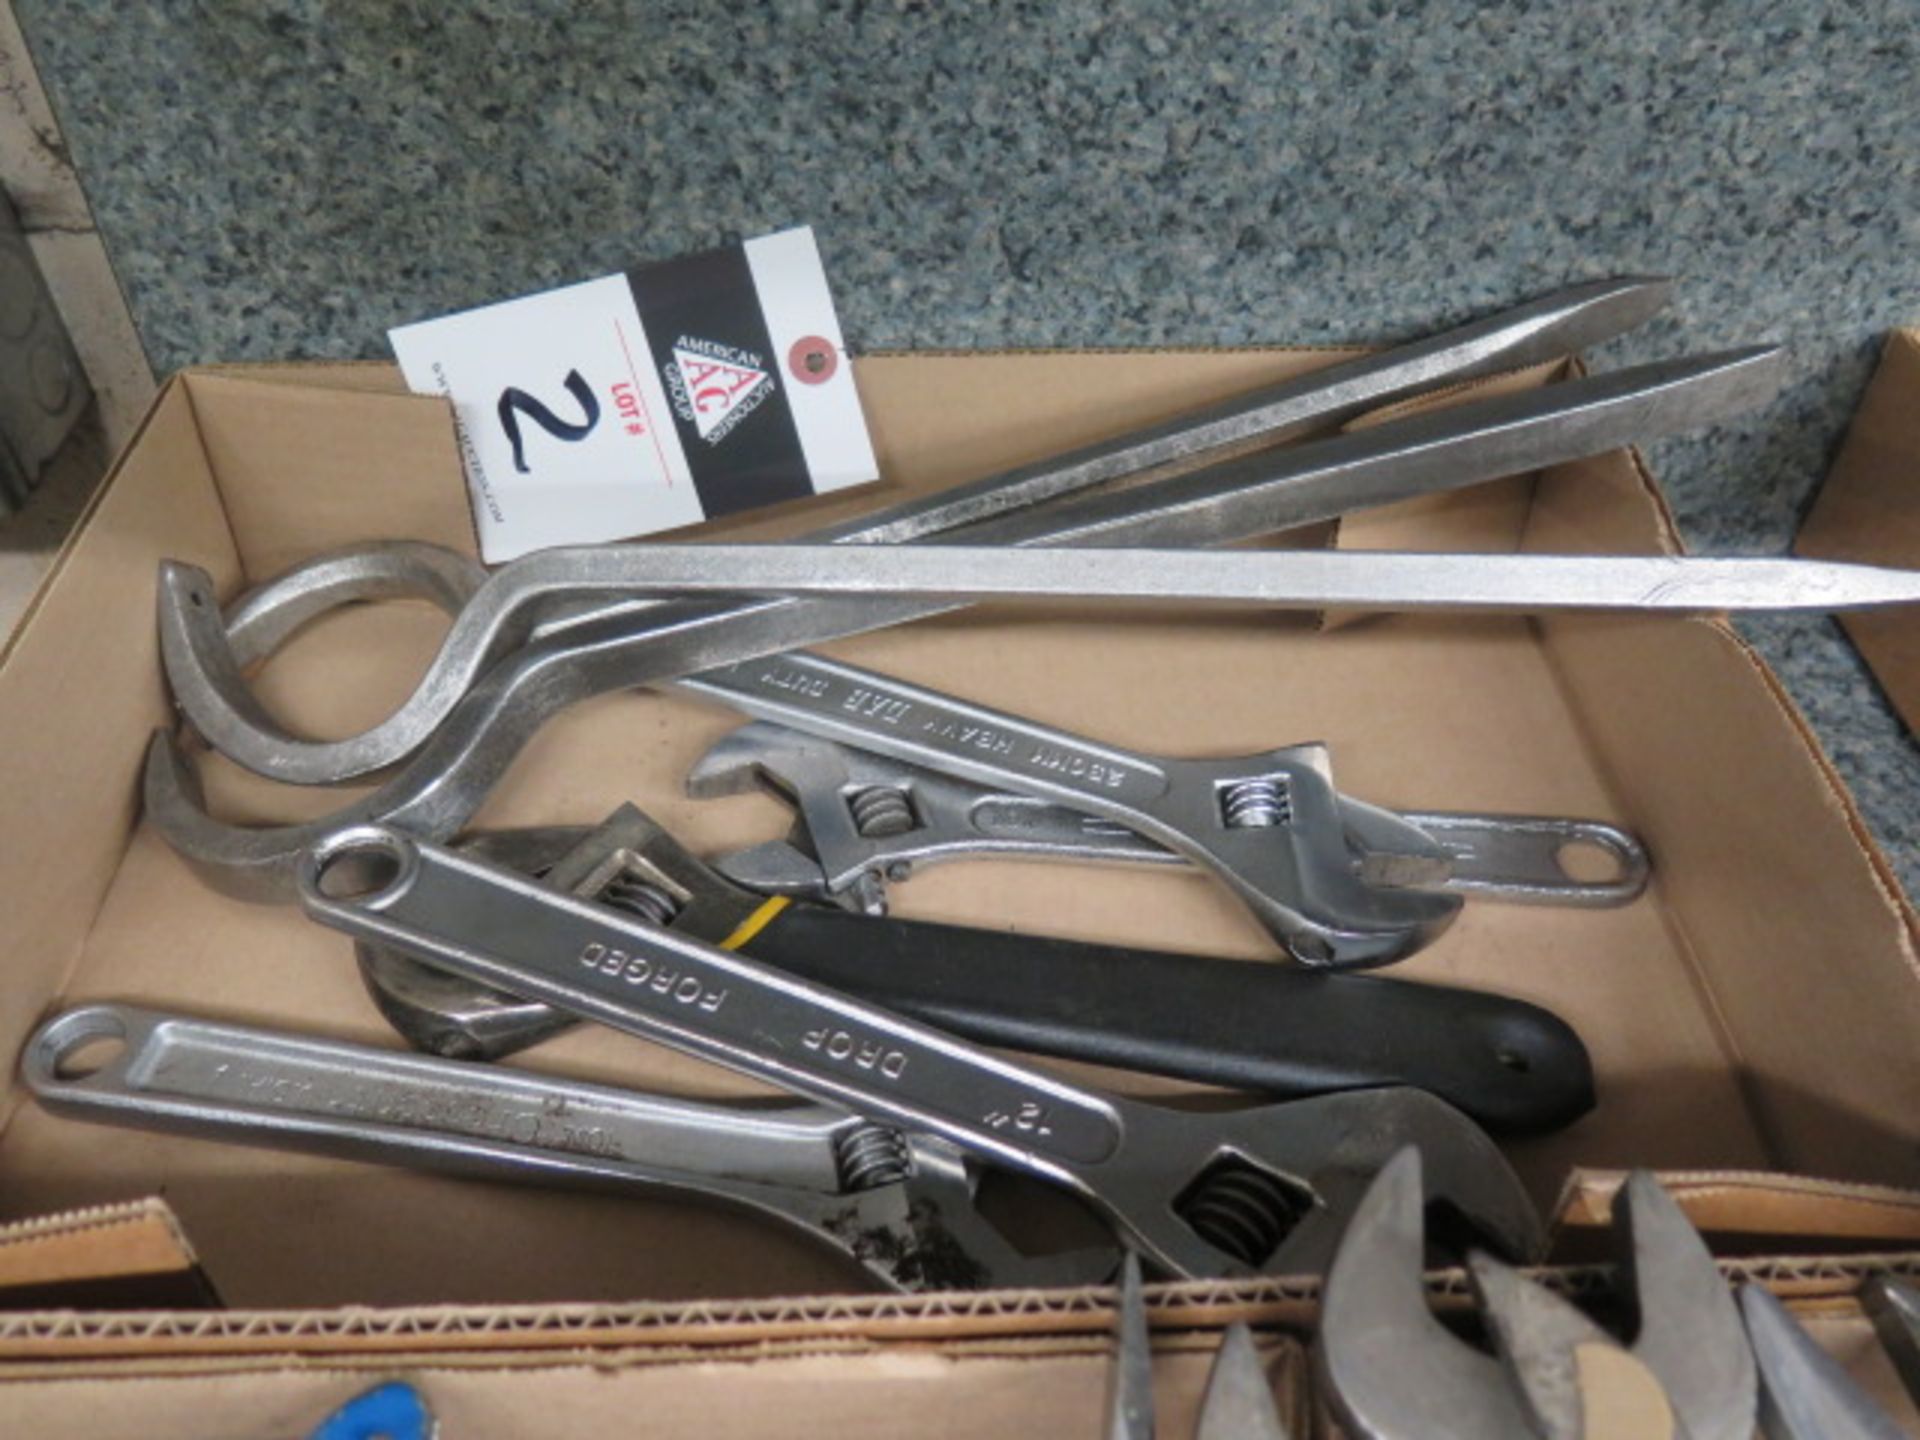 Adjustable Wrenches and Pry Bars (SOLD AS-IS - NO WARRANTY)